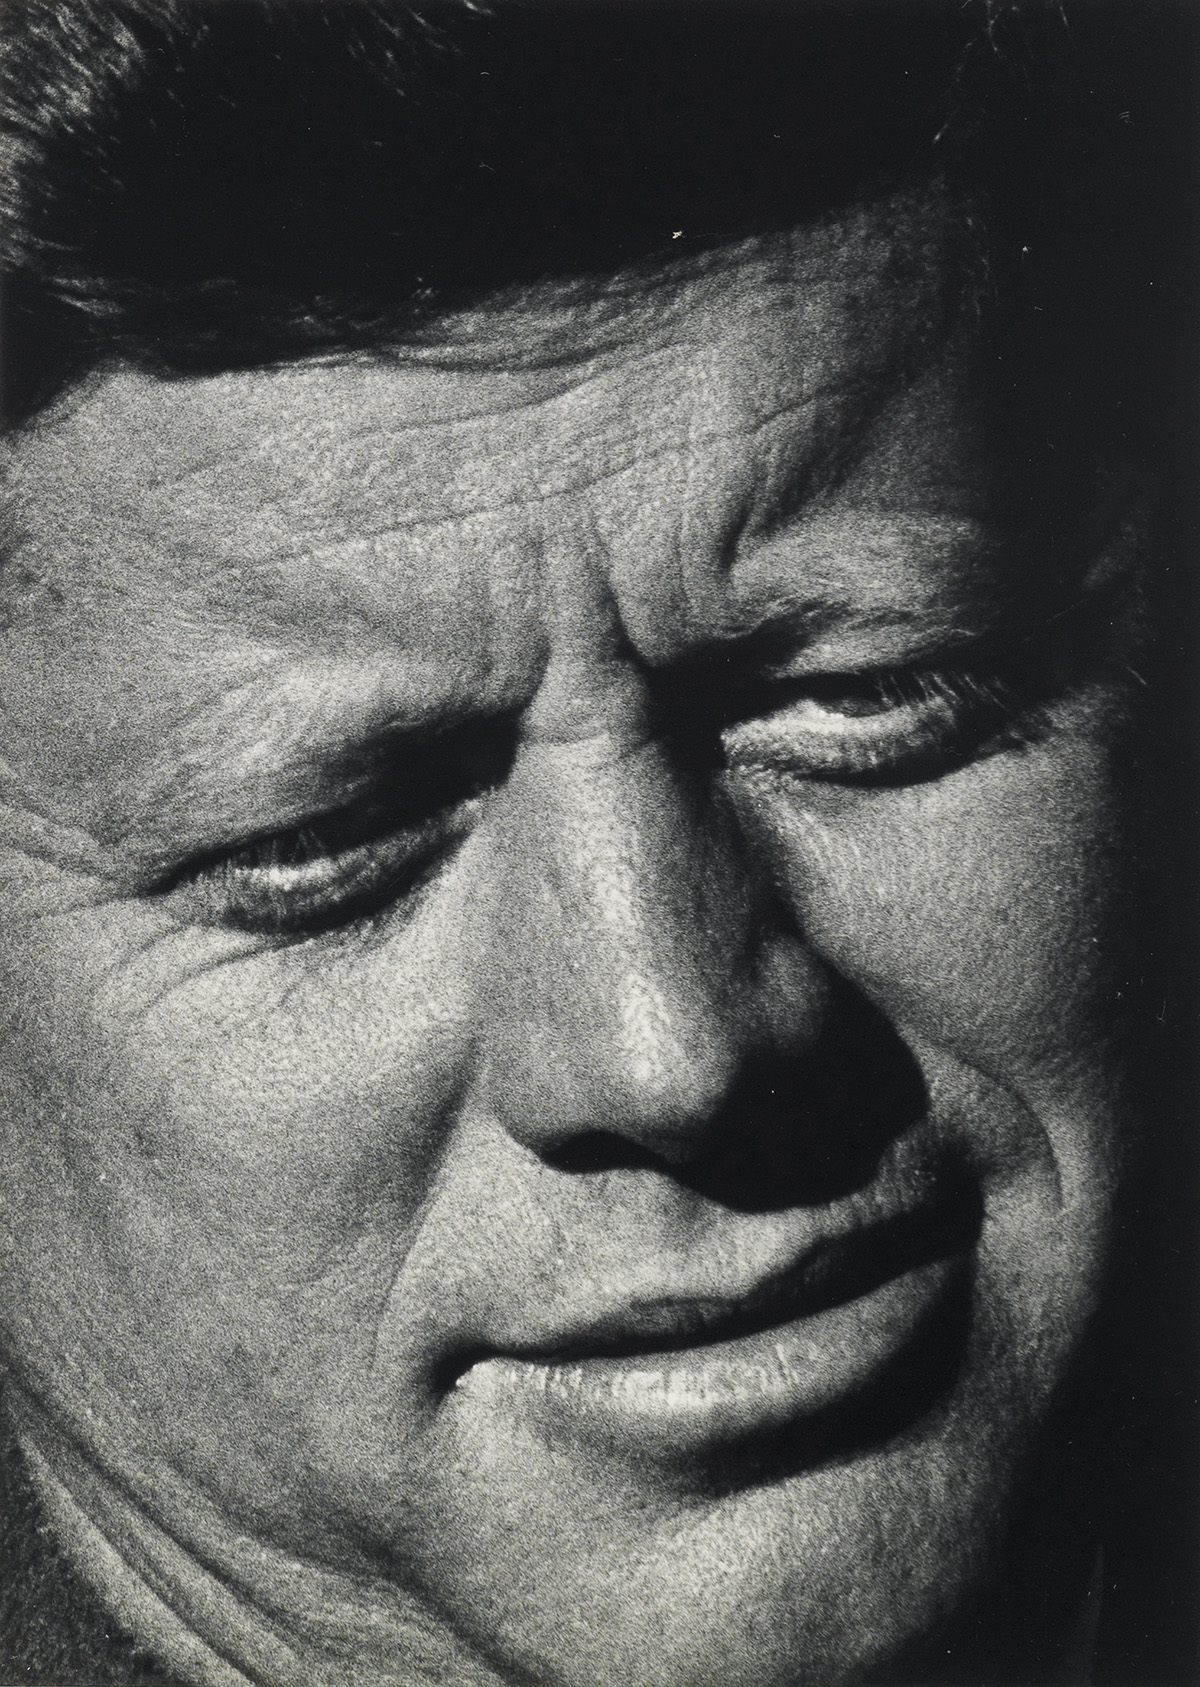 EDWARD WALLOWITCH (1932-1981)  Suite of 7 photographs taken during the John F. Kennedy presidential campaign.